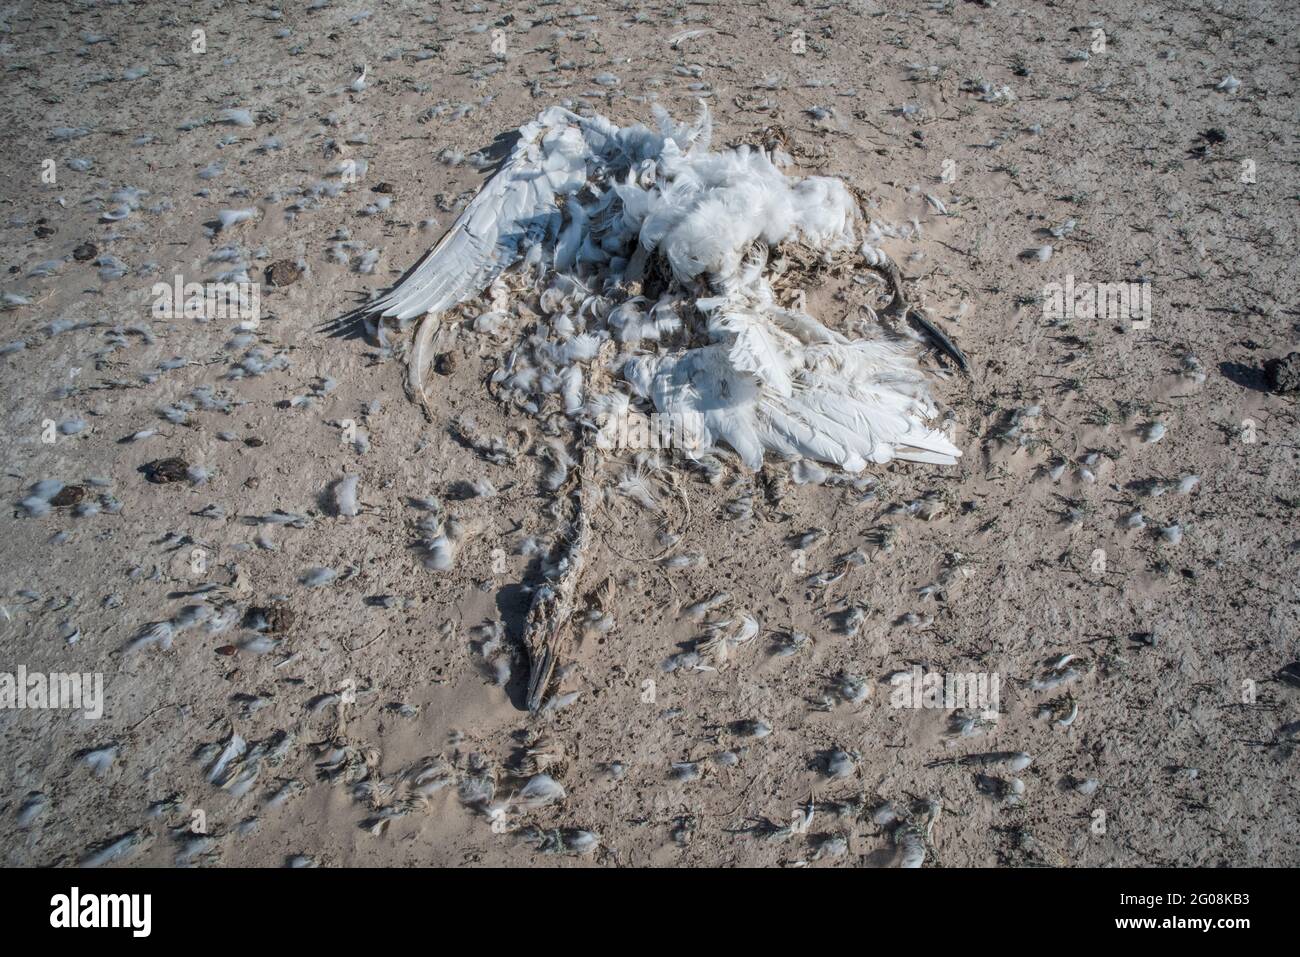 A dead tundra swan (Cygnus columbianus) lays in the dried mud of a former wetland in California. Stock Photo